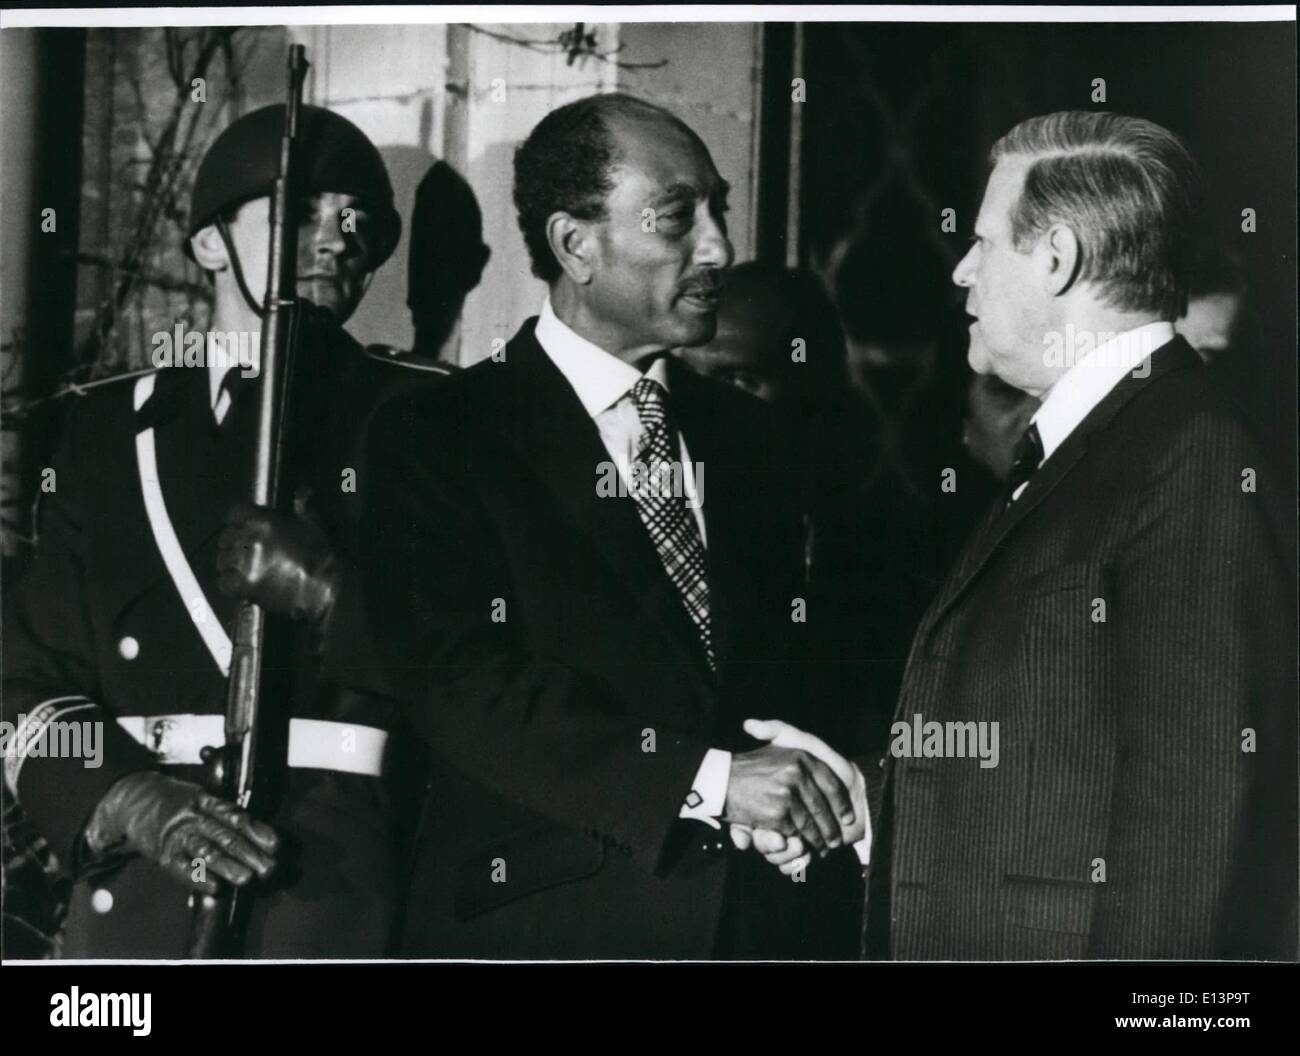 Mar. 22, 2012 - State Visit of The Egypt State-President Anwar El Sadat In West-Germany After the signing of the peace-treaty between Egypt and Israel with the Israel Prime Minister Begin, at march 26th 1979 in Washington/USA, the Egypt State-President Anwar el Sadat made a intermediate-station from march 29th to 30th 1979 in Bonn/West-Germany. Themes of the talks with Federal President Walter Scheel and Federal Chancellor Helmut Schmidt where the possibilities of the engagement of West-Germany and the Europe Society at the development of the peace in the Near East Stock Photo